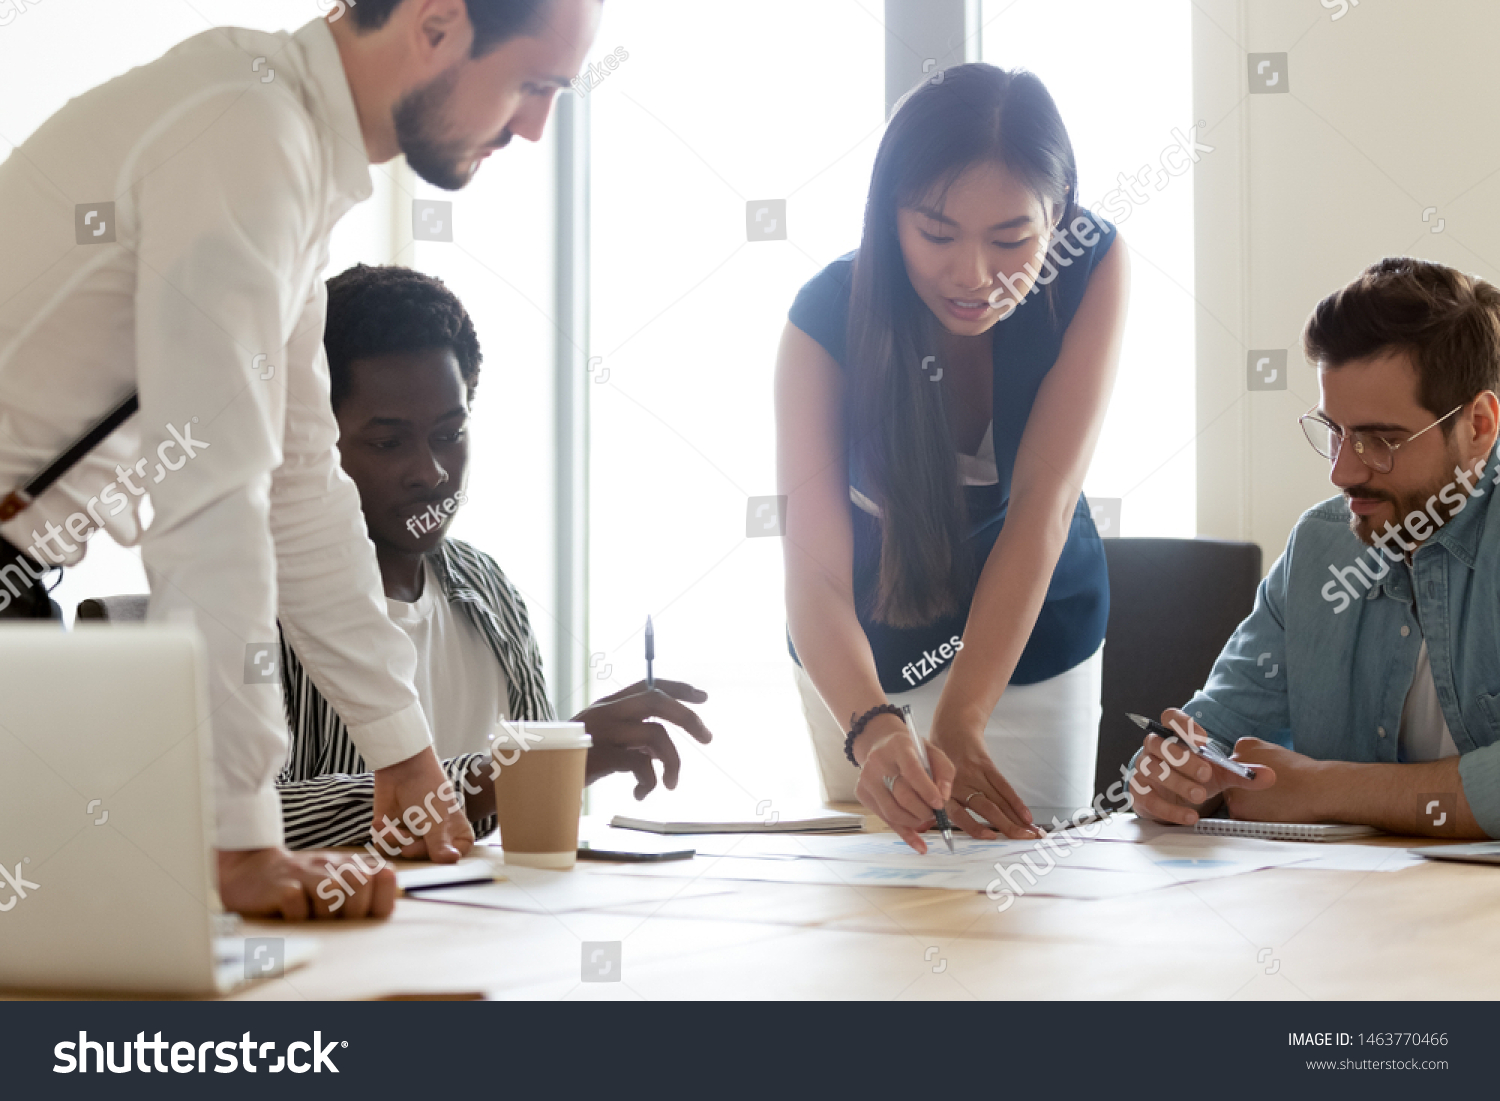 Focused diverse business executive team people designers architects with female asian leader manager discuss paperwork financial report brainstorm work together at group corporate office meeting #1463770466